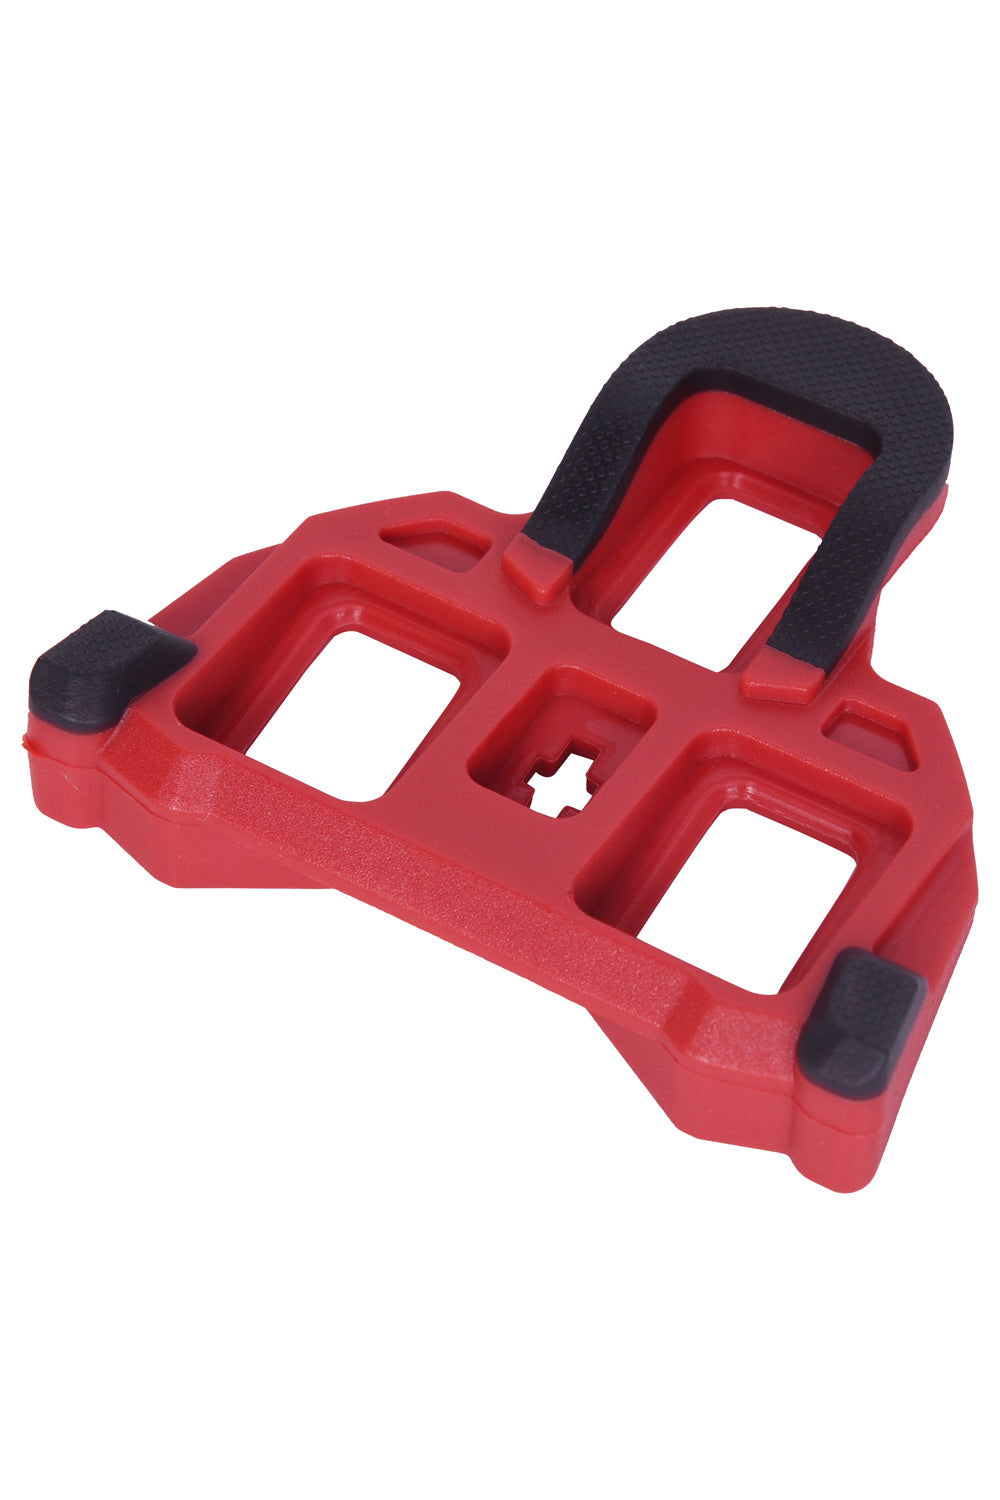 Sundried R0 Cleats 0 Degree Of Float - Compatible with SPD-SL Pedals Cleat SD0378 Activewear